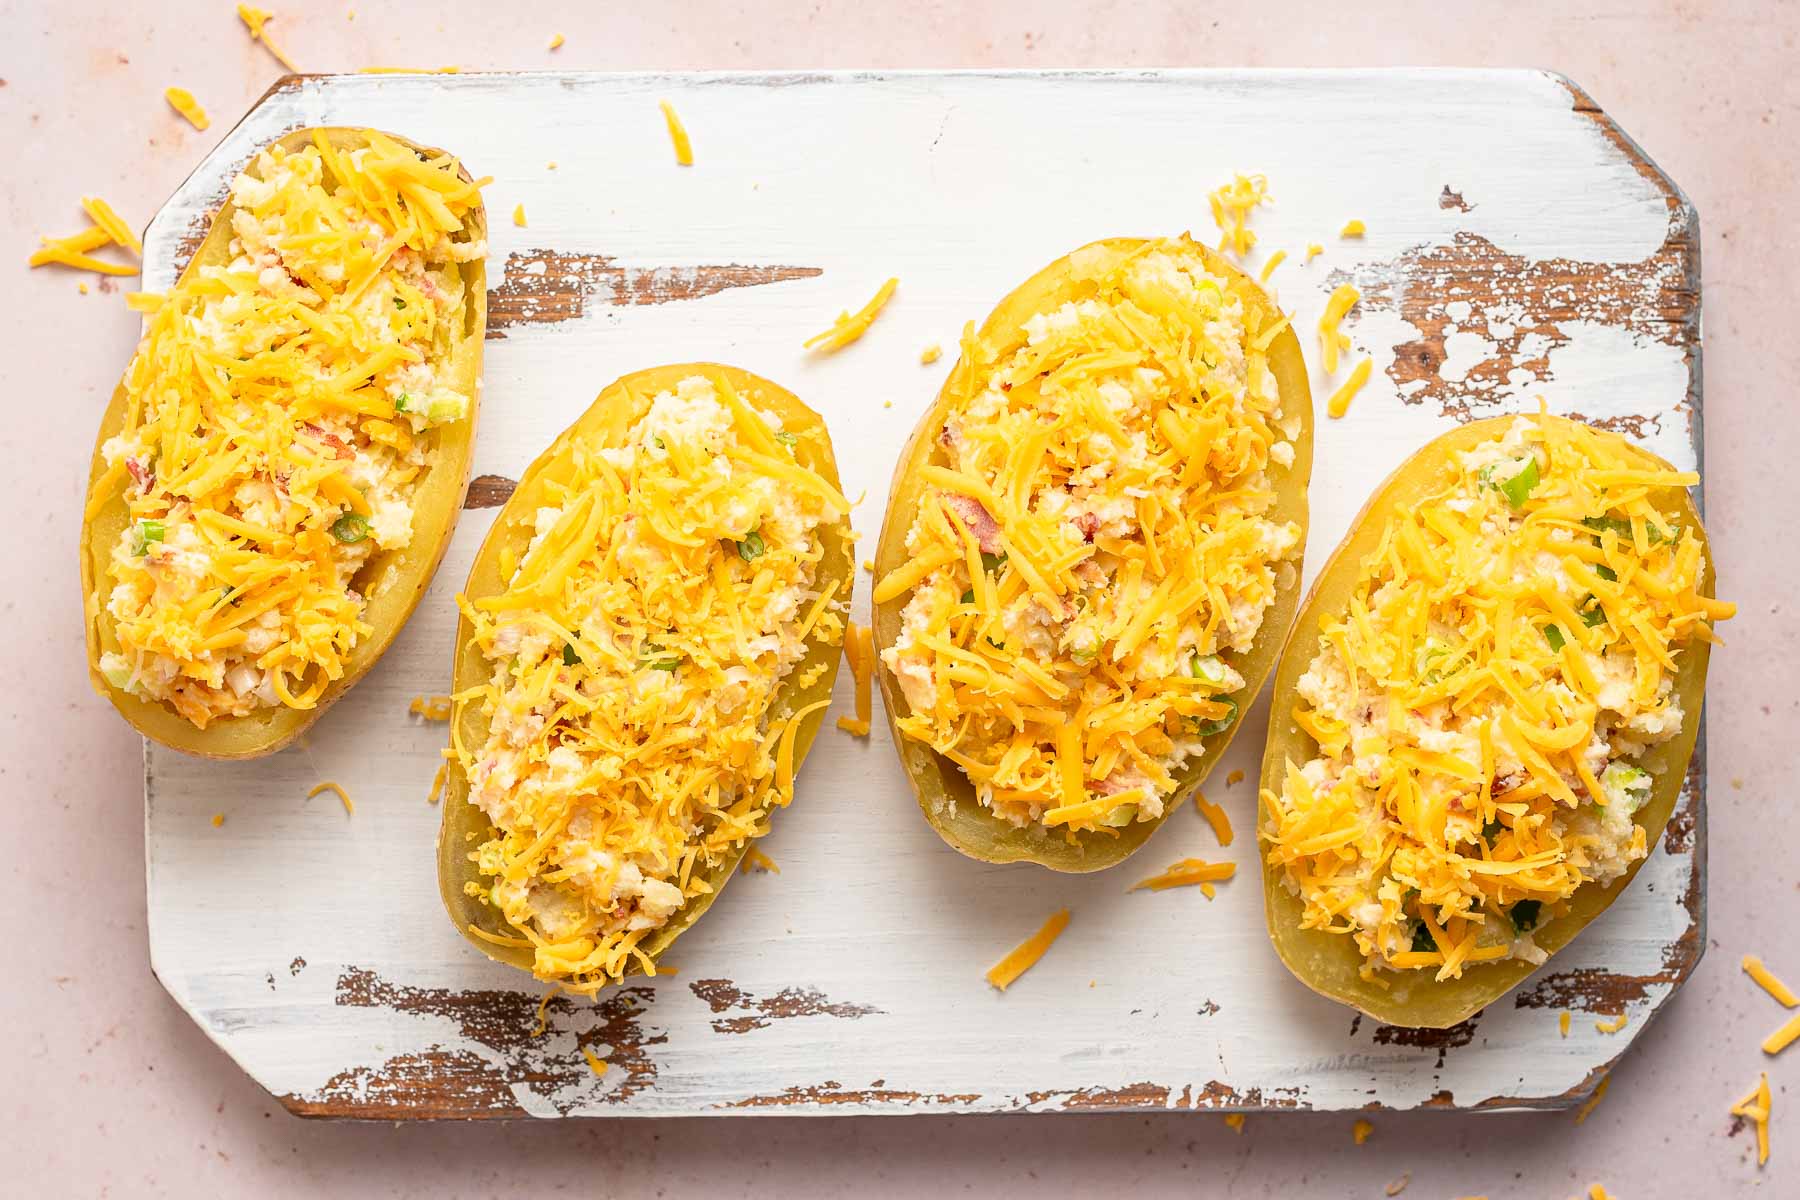 Baked potatoes cut in half and topped with cheese.